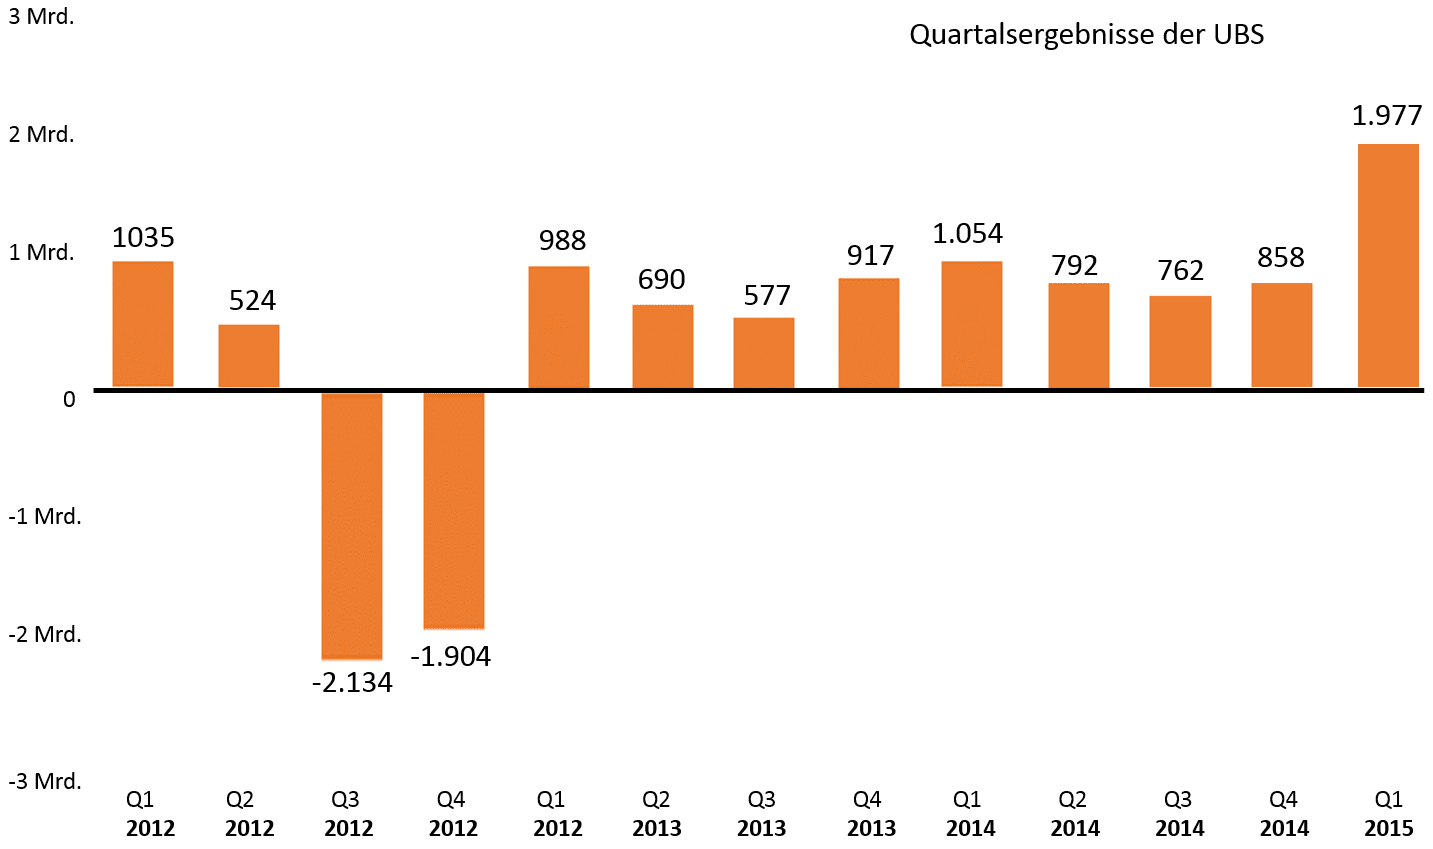 Quarterly Profit of UBS in Swiss Francs